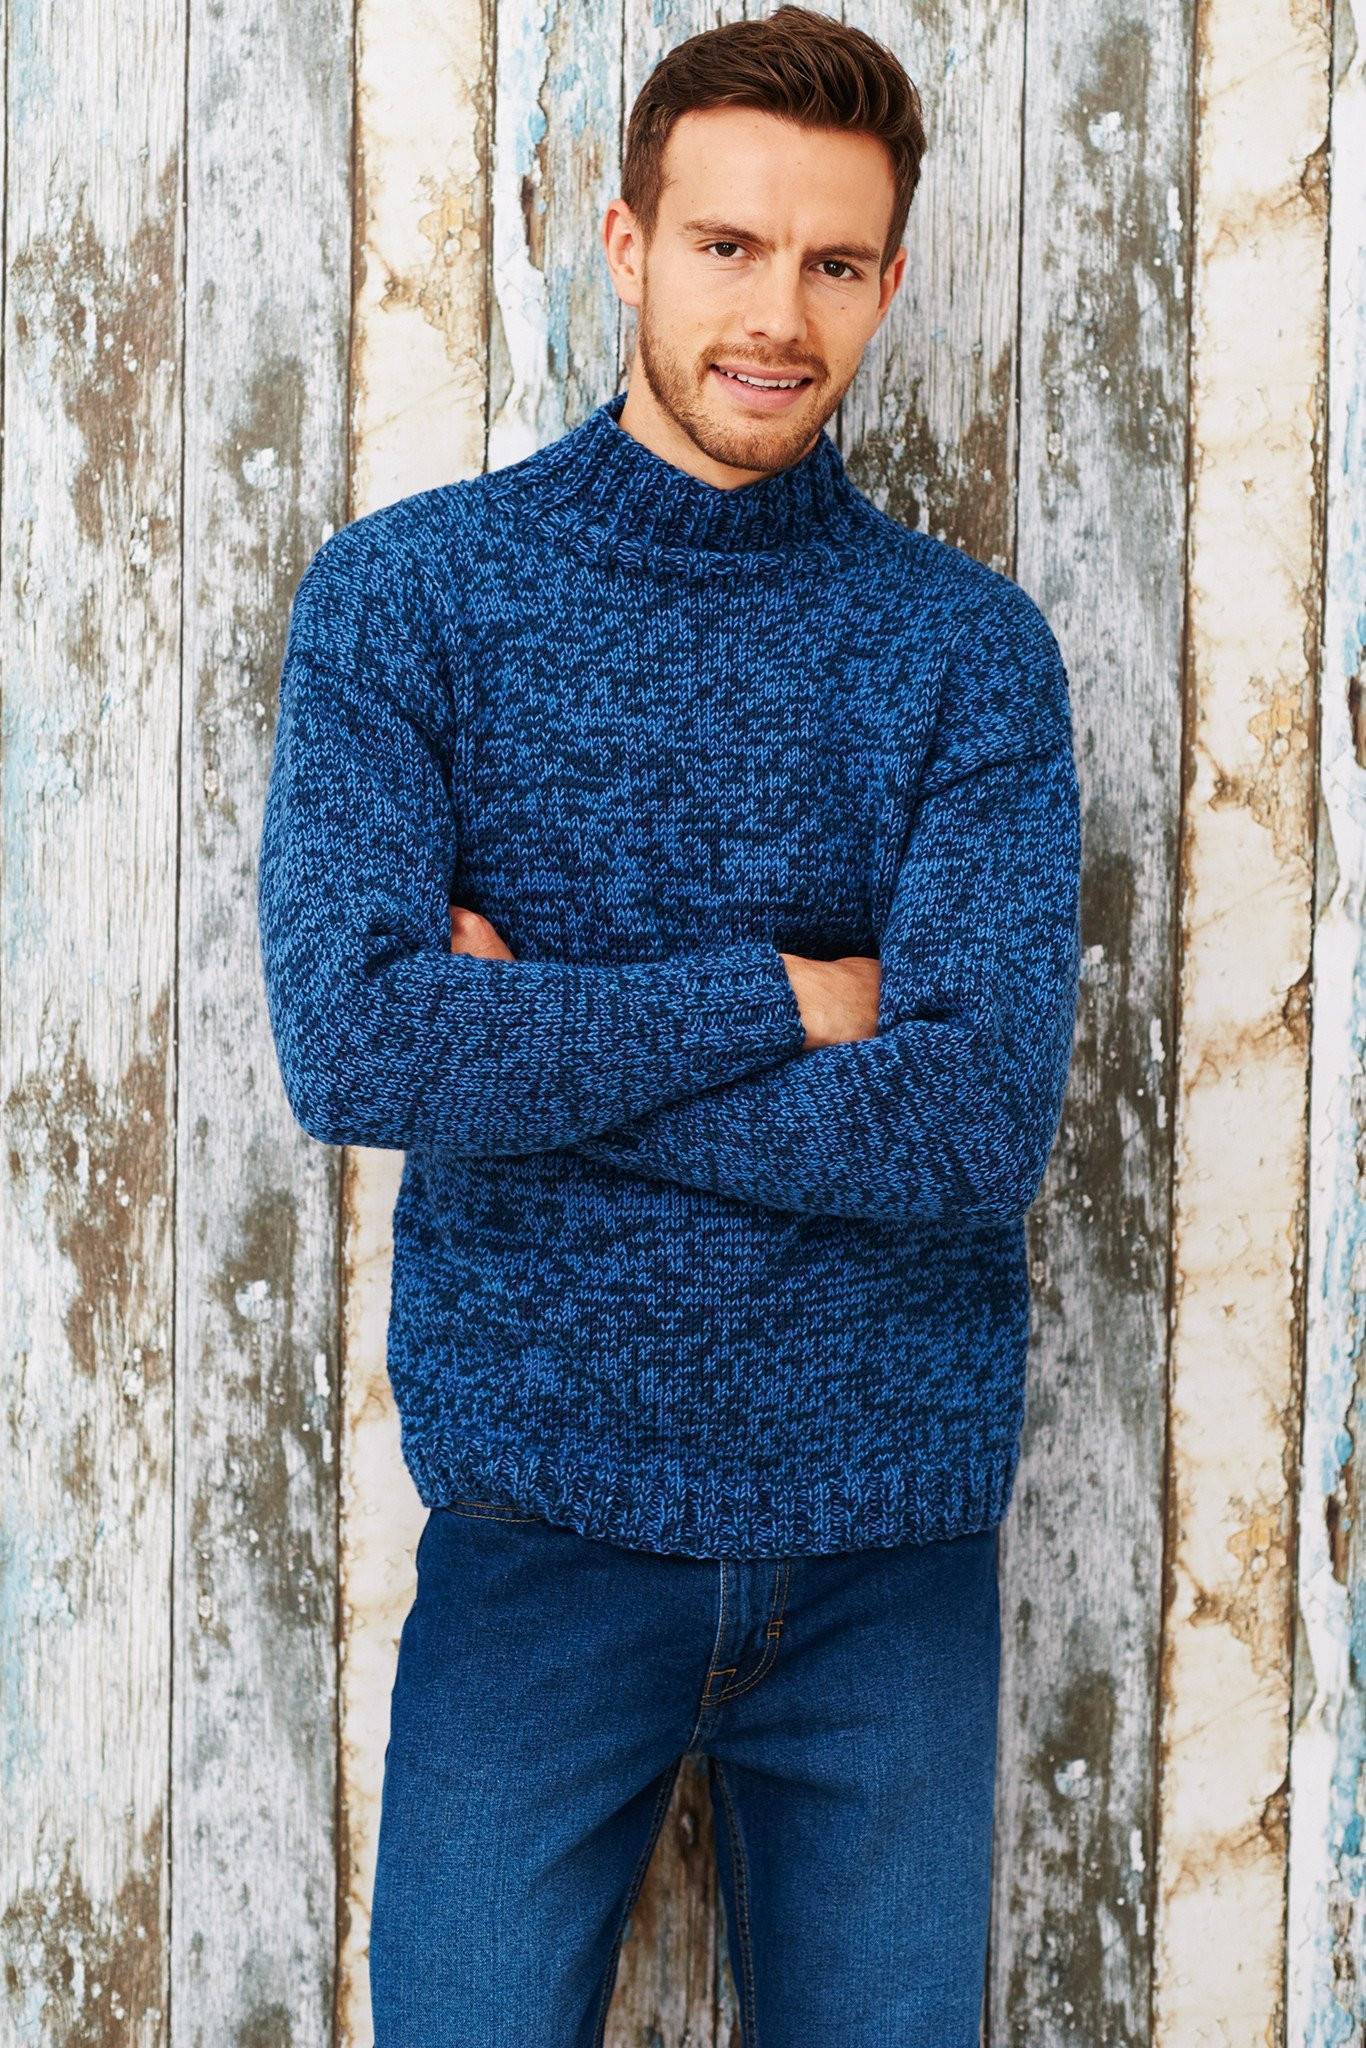 Mens Jumper Knitting Pattern: A Guide for Beginners - Mikes Nature